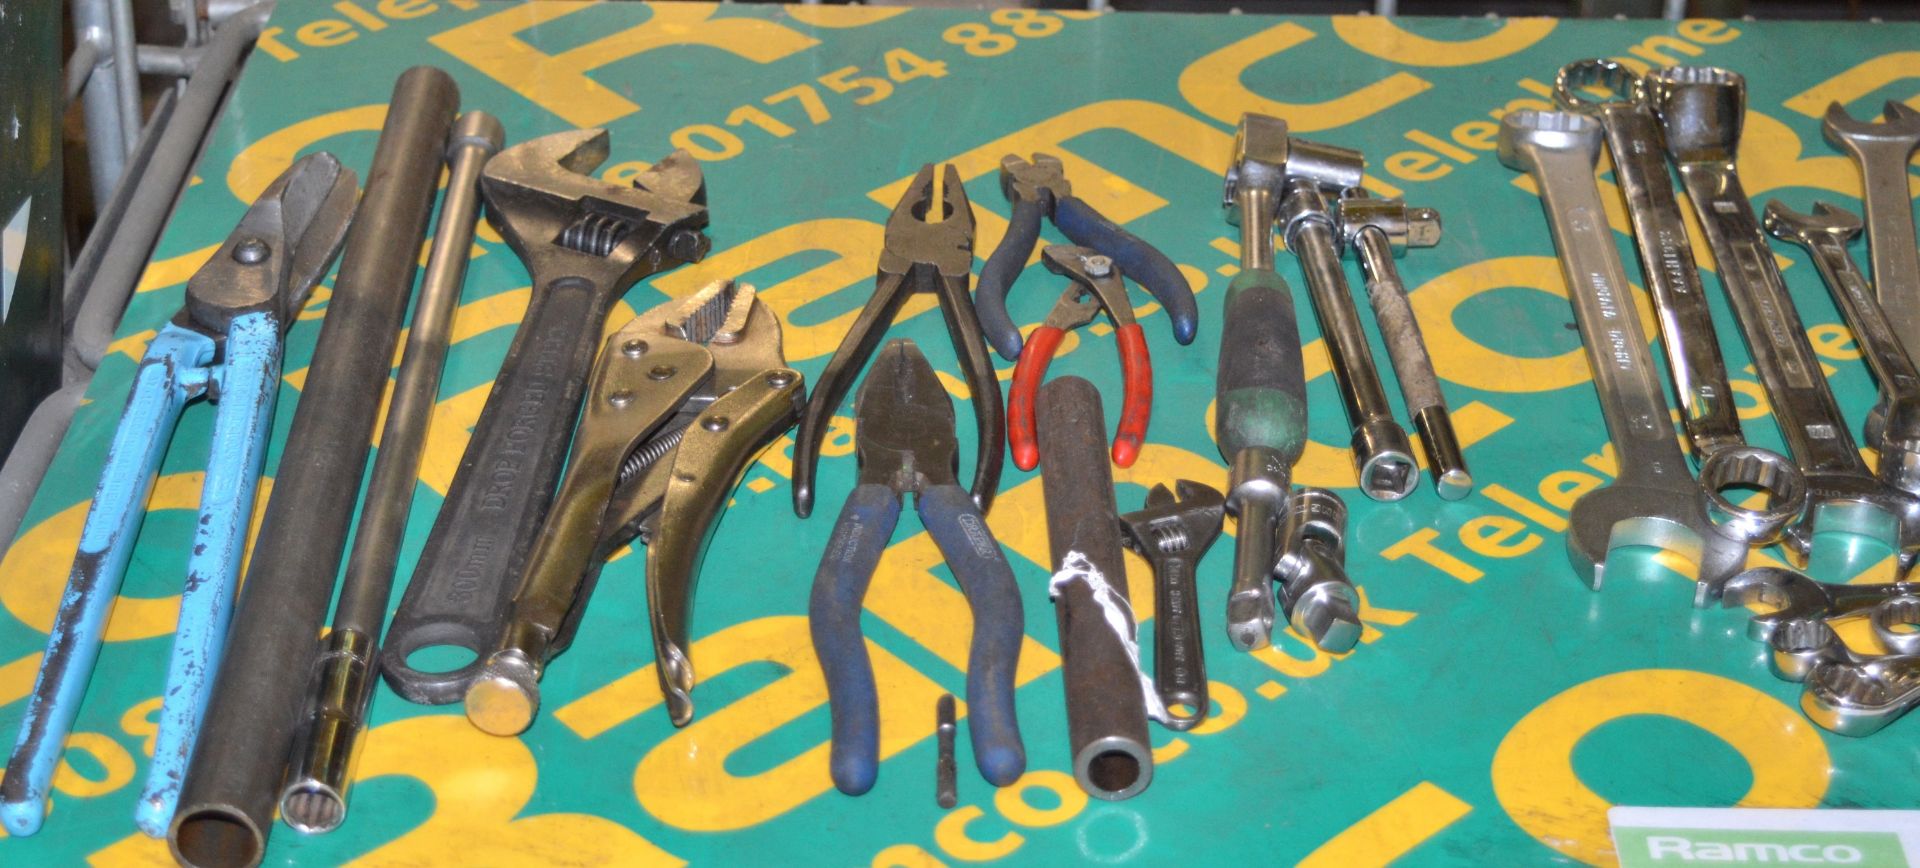 Spanners, Pliers, Snips, Sockets. - Image 2 of 3